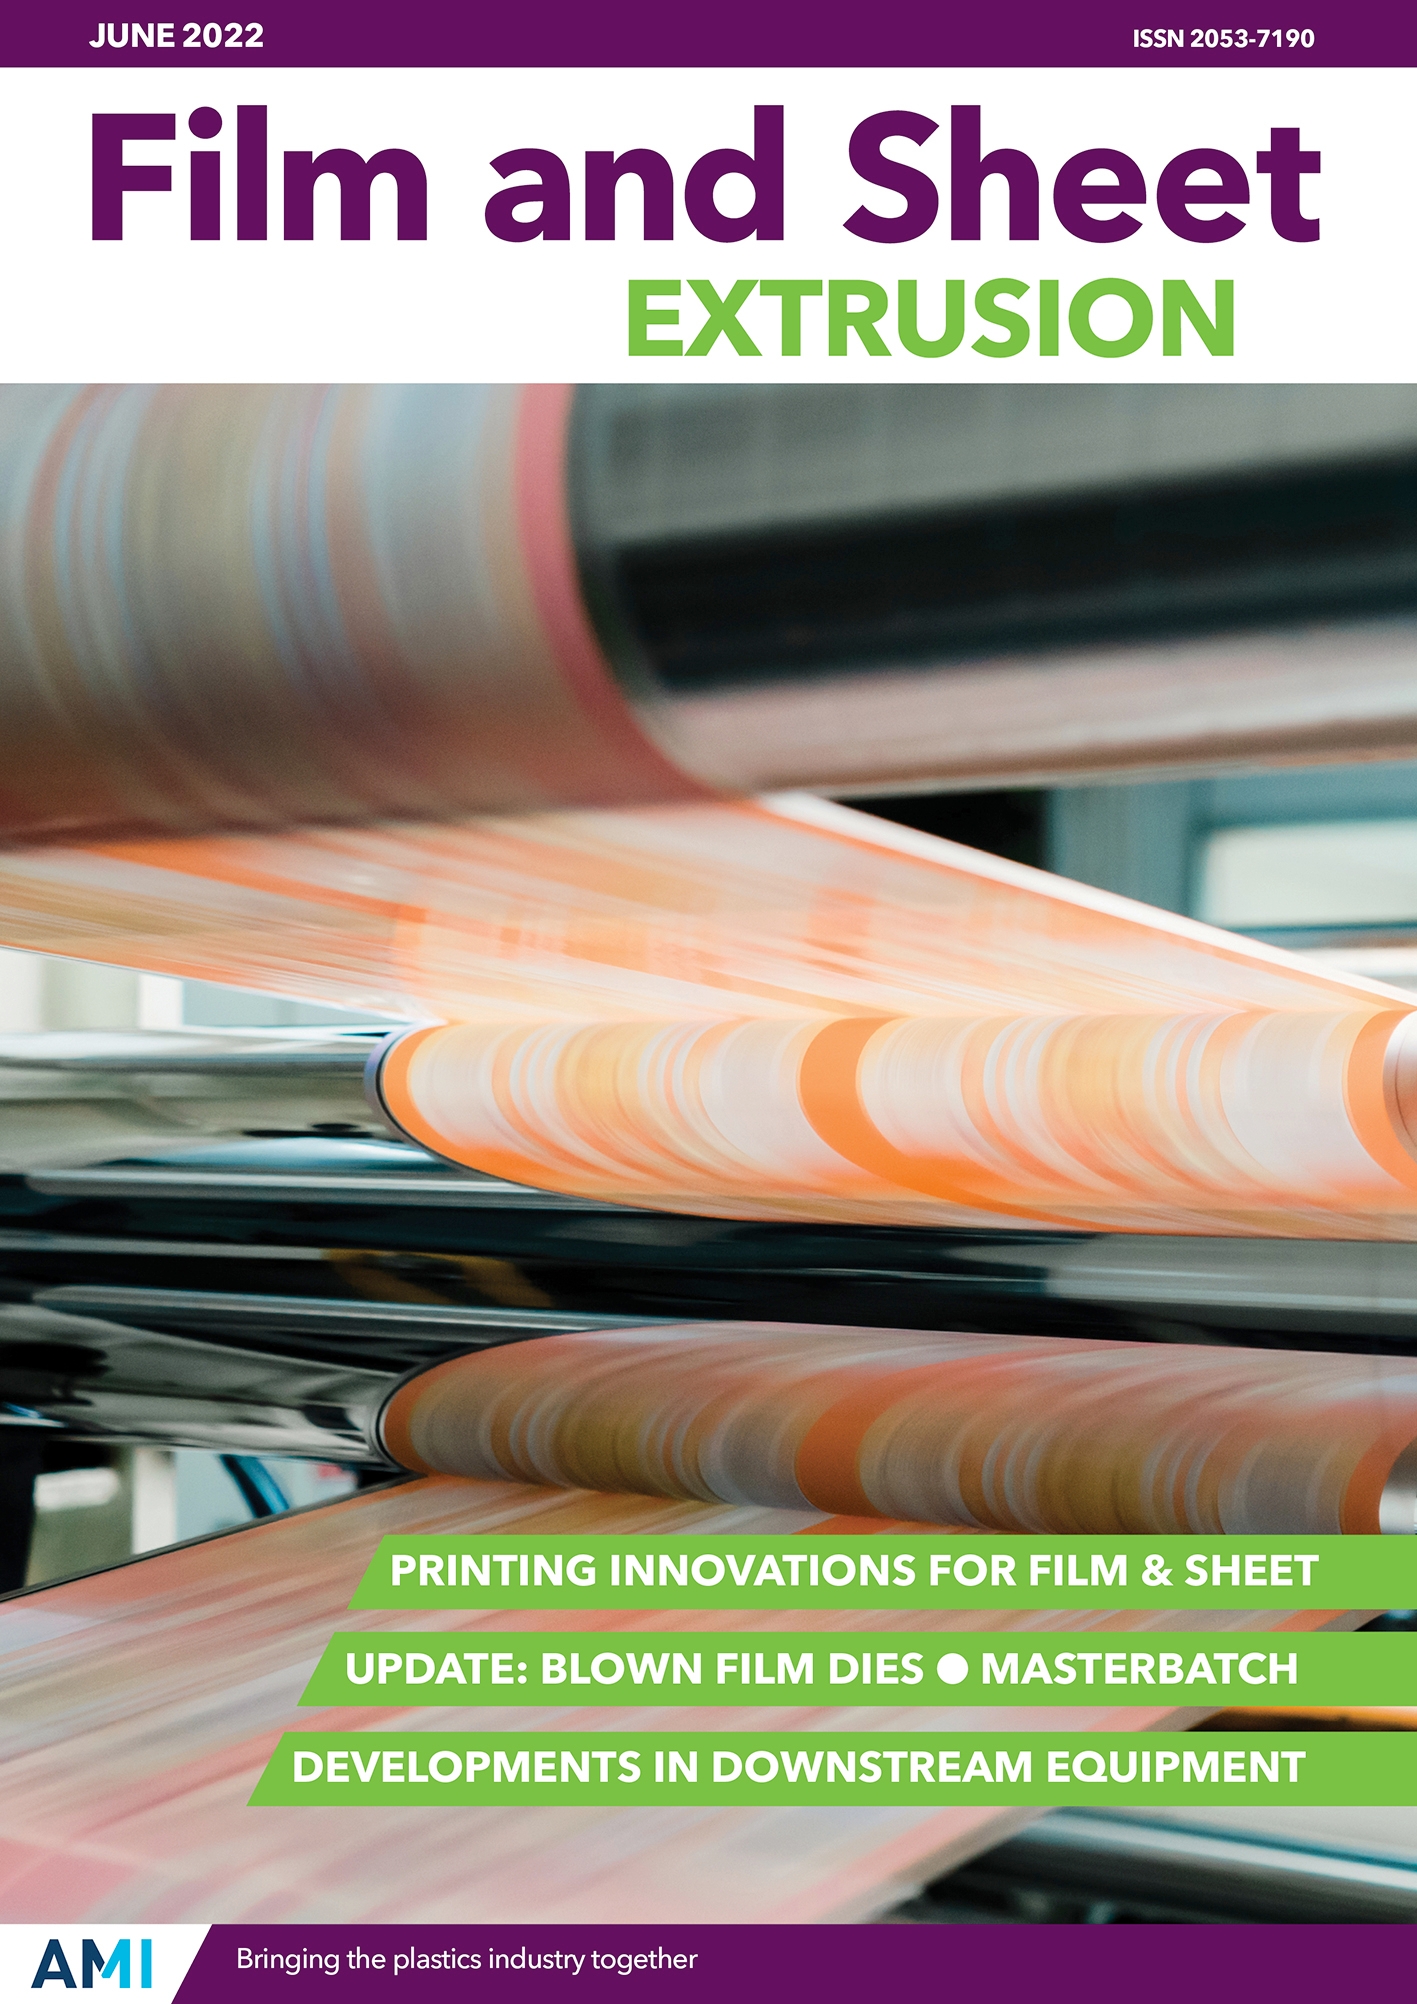 Film and Sheet Extrusion June 2022